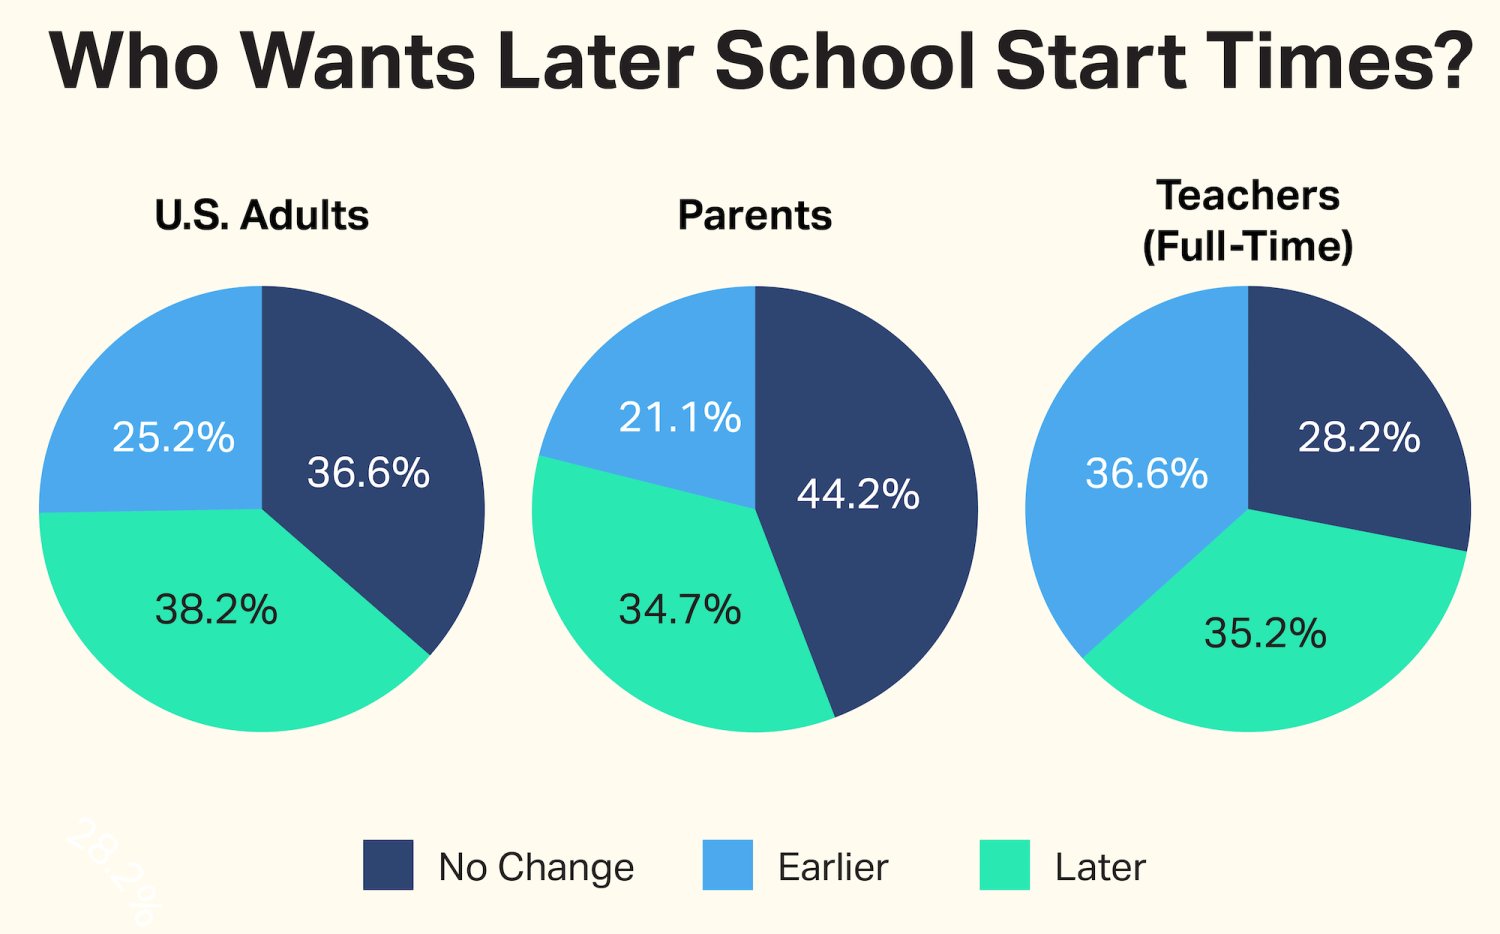 Later School Start Times More Popular, But What Are the Drawbacks? NEA